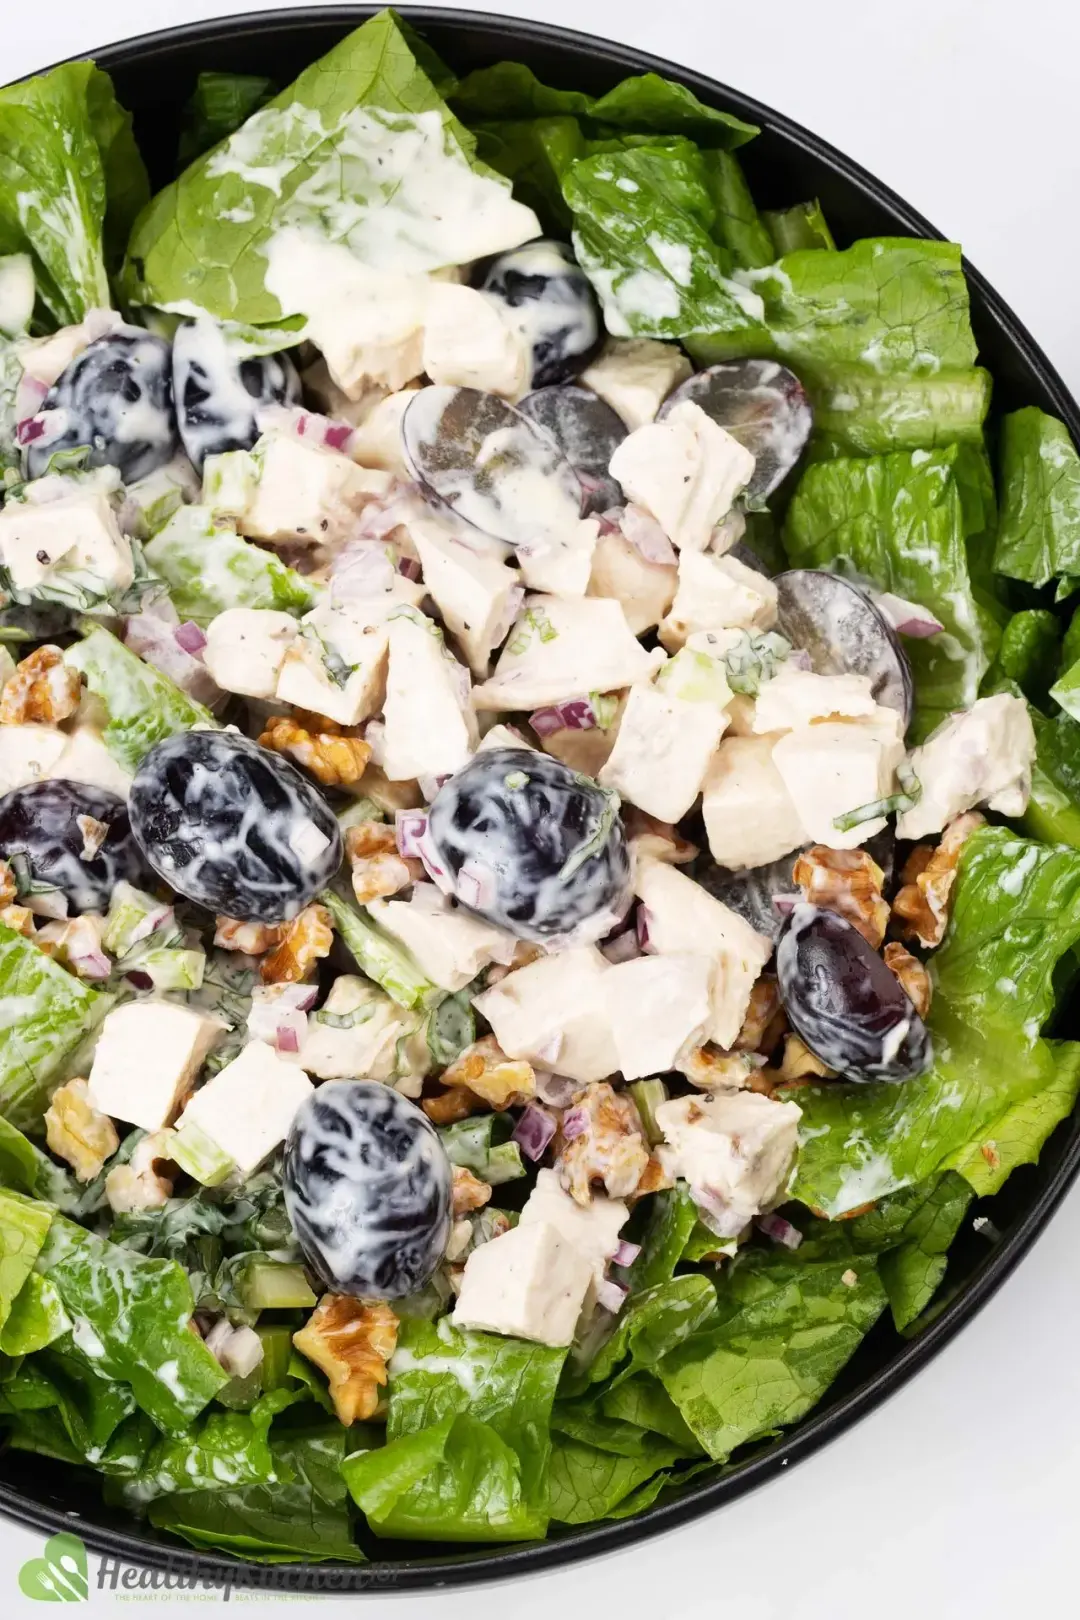 A plate full of mayonnaise-dressed waldorf salad with lettuce, grapes, walnuts, and chicken breasts